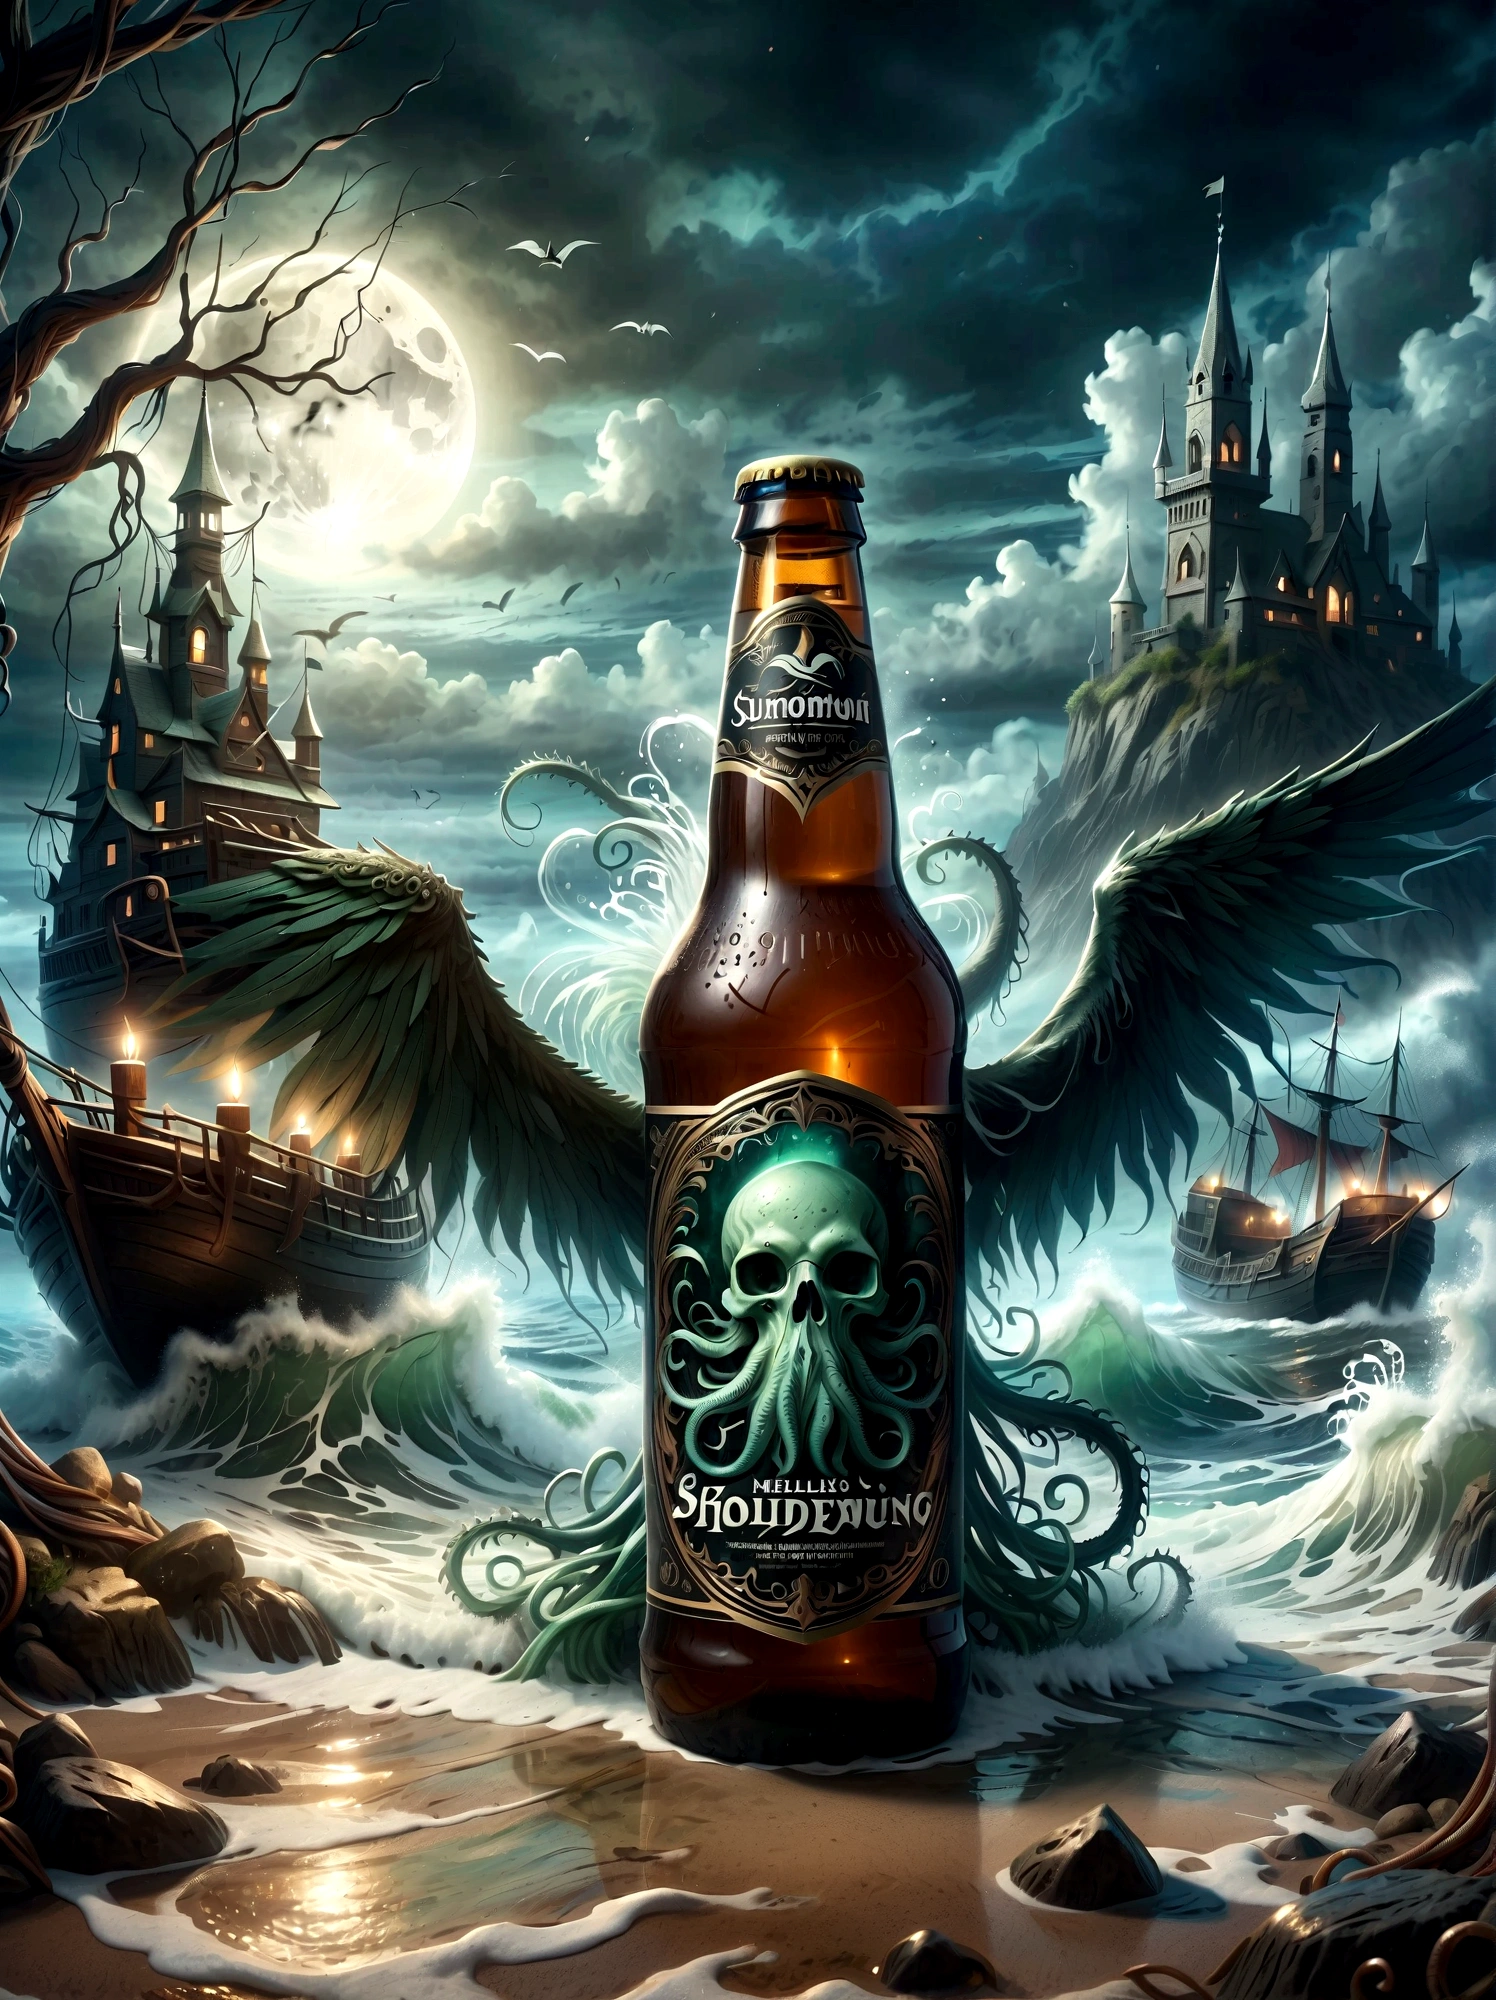 Visualize this: a dimly lighted ancient, colossal creature, reminiscent of Lovecraft's creature with tentacles and wings - descending ominously through misty waters. In the foreground, a crafted beer displaying intricate details on the bottle, the frothy ale almost spilling out of its brim, with the eerie backdrop subtly reflecting on the glass surface. The atmosphere is thick with an undercurrent of subtle horror seductively luring you into this scenario borrowed from Lovecraft's eerie world but reimagined with modern elements.